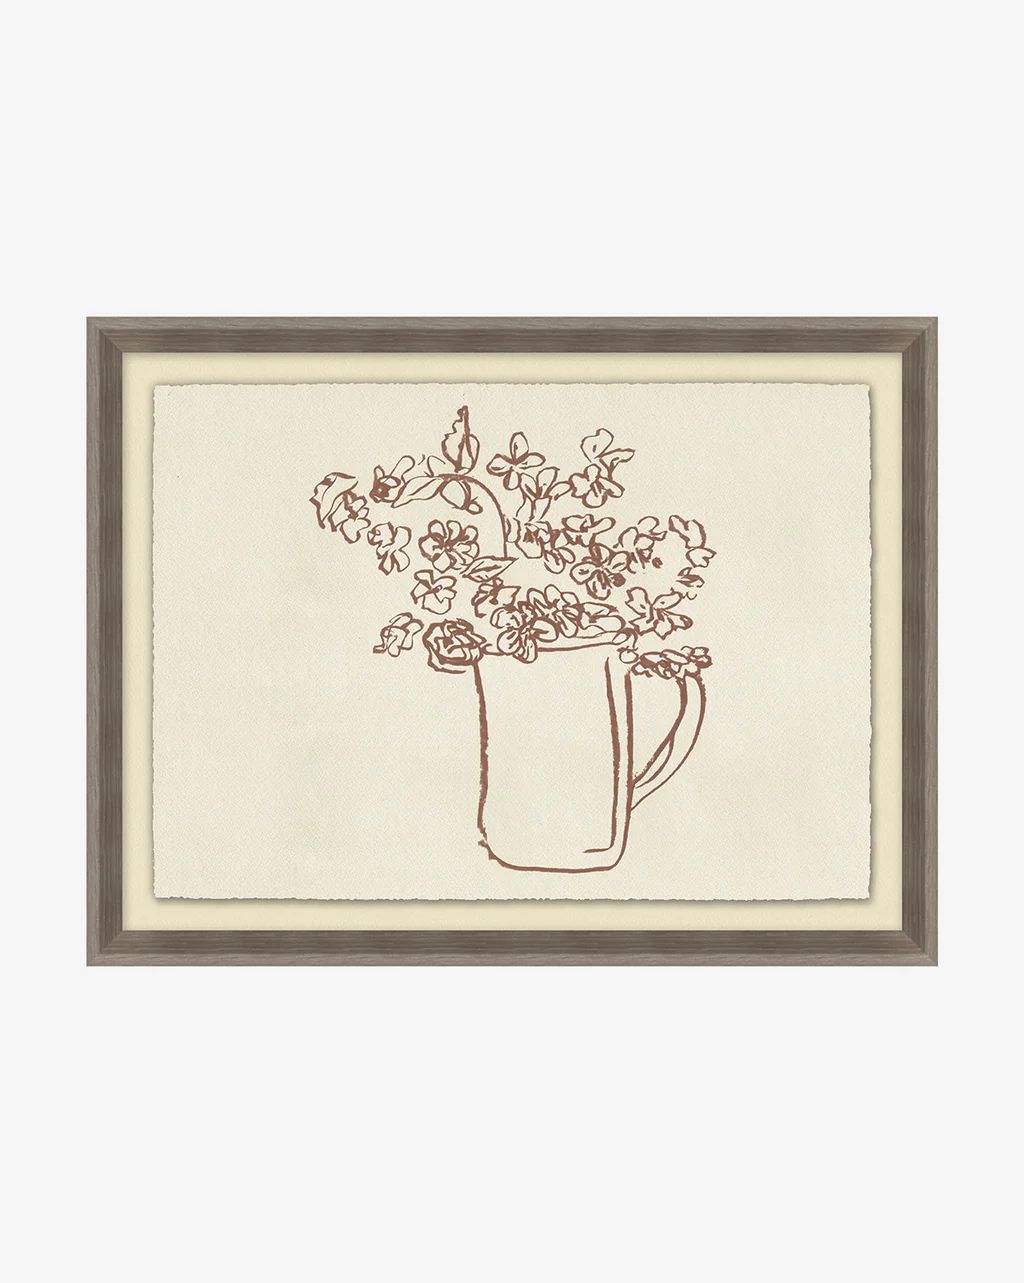 Pitcher of Flowers | McGee & Co.